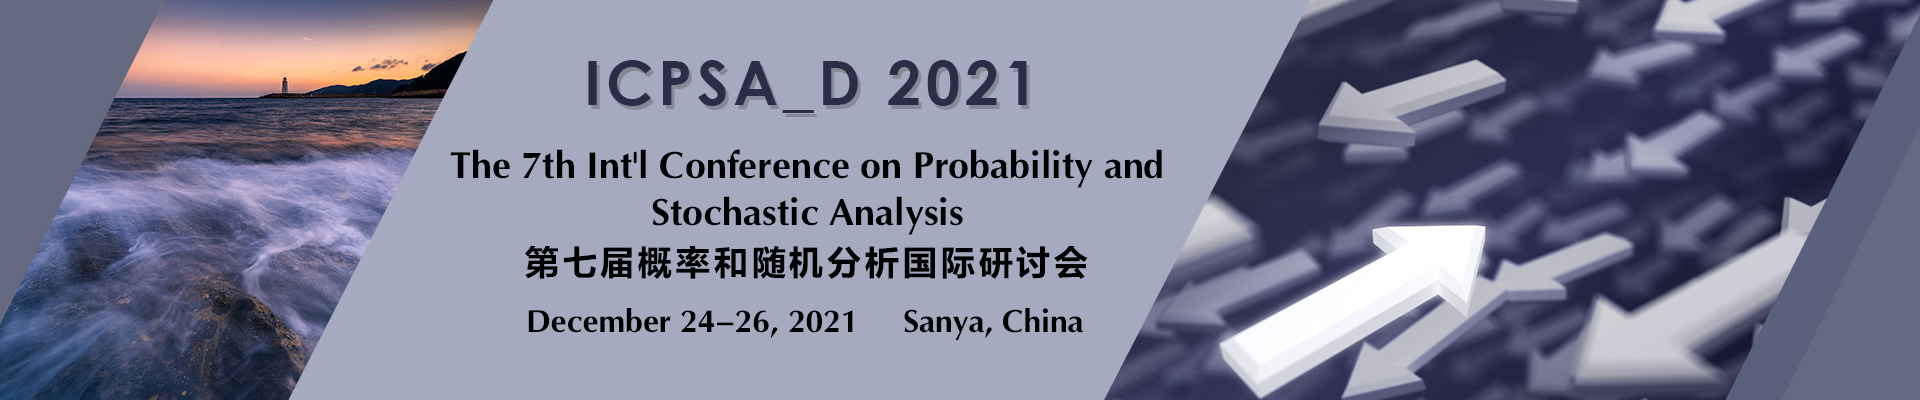 The 7th Int'l Conference on Probability and Stochastic Analysis (ICPSA_D 2021), Sanya, Hainan, China